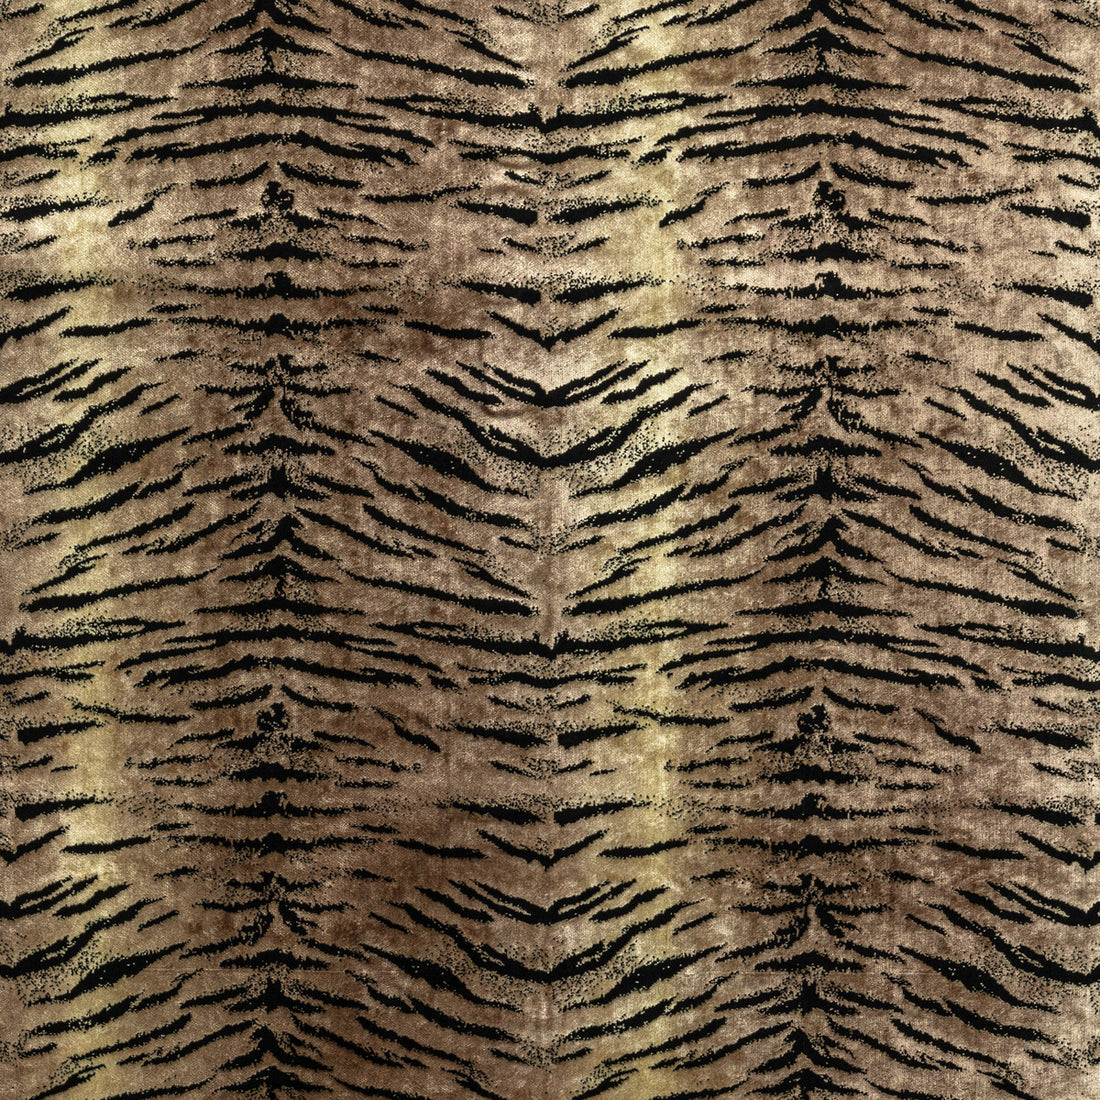 Animalier fabric in anthracite color - pattern 36327.86.0 - by Kravet Couture in the Modern Luxe III collection